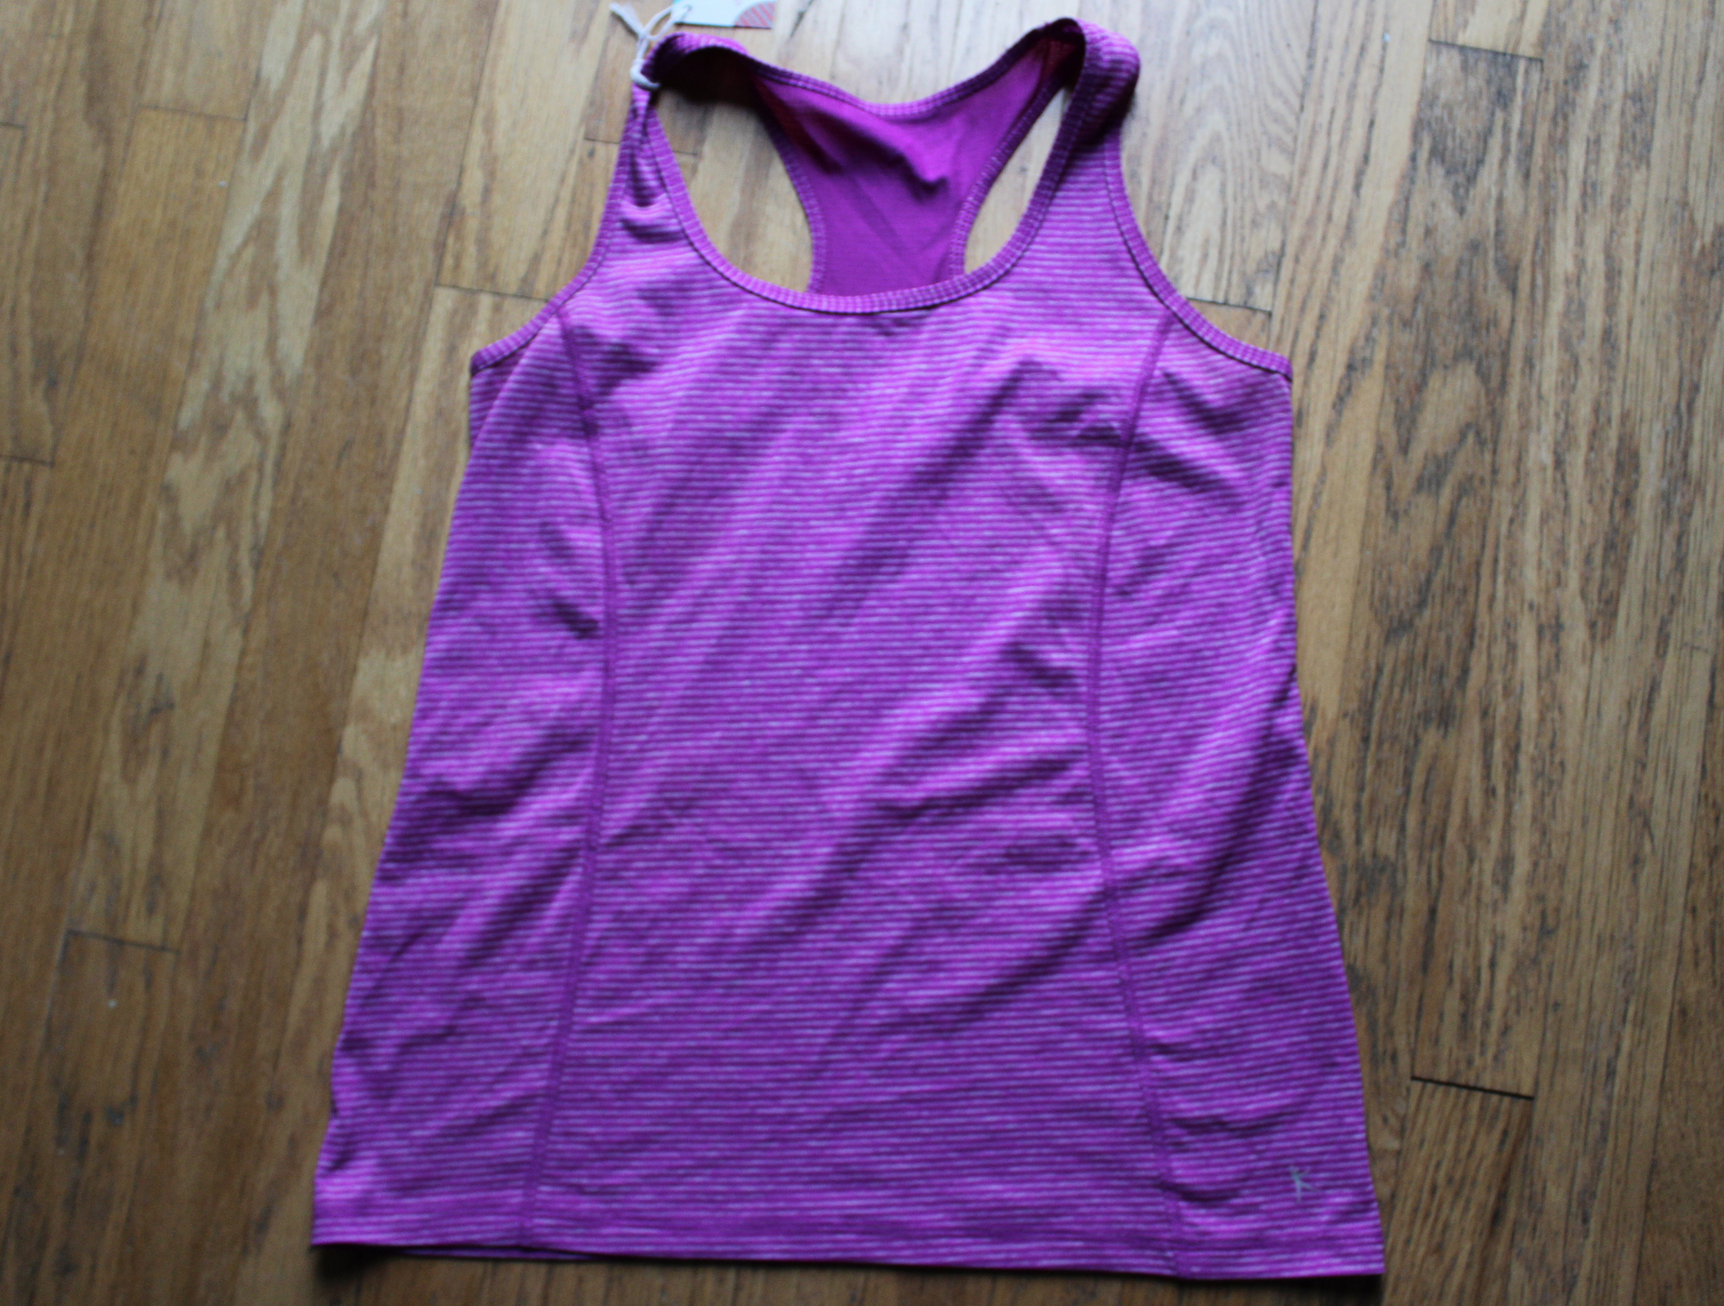 How to Save Money on Workout Clothes